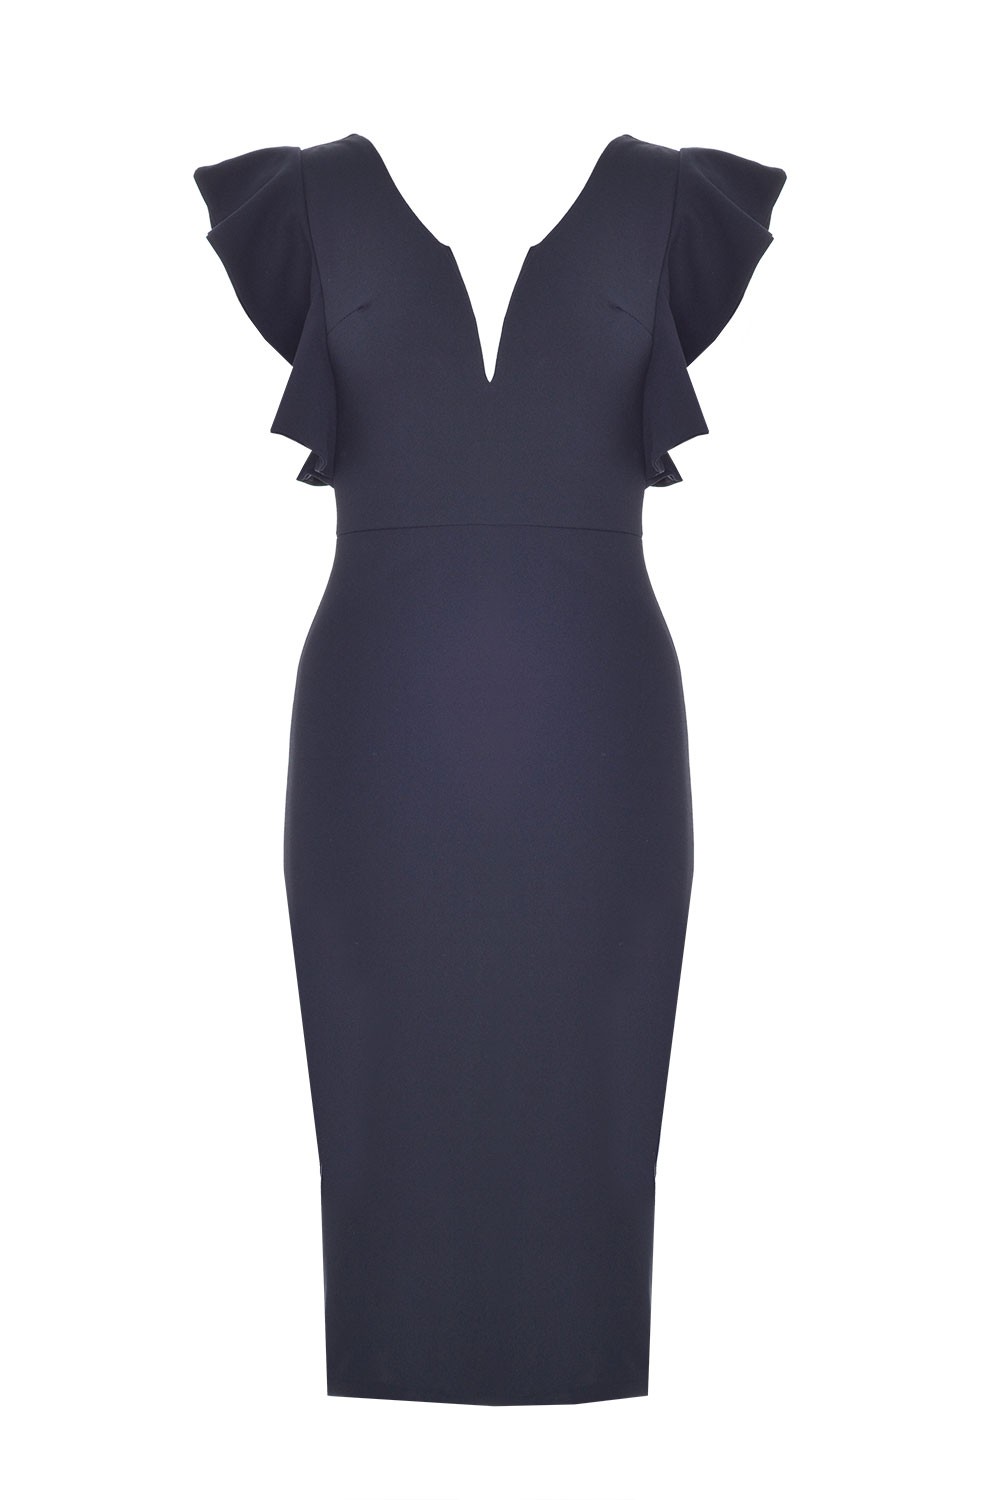 Wal G Diana Plunge Neck Midi Dress in Navy | iCLOTHING